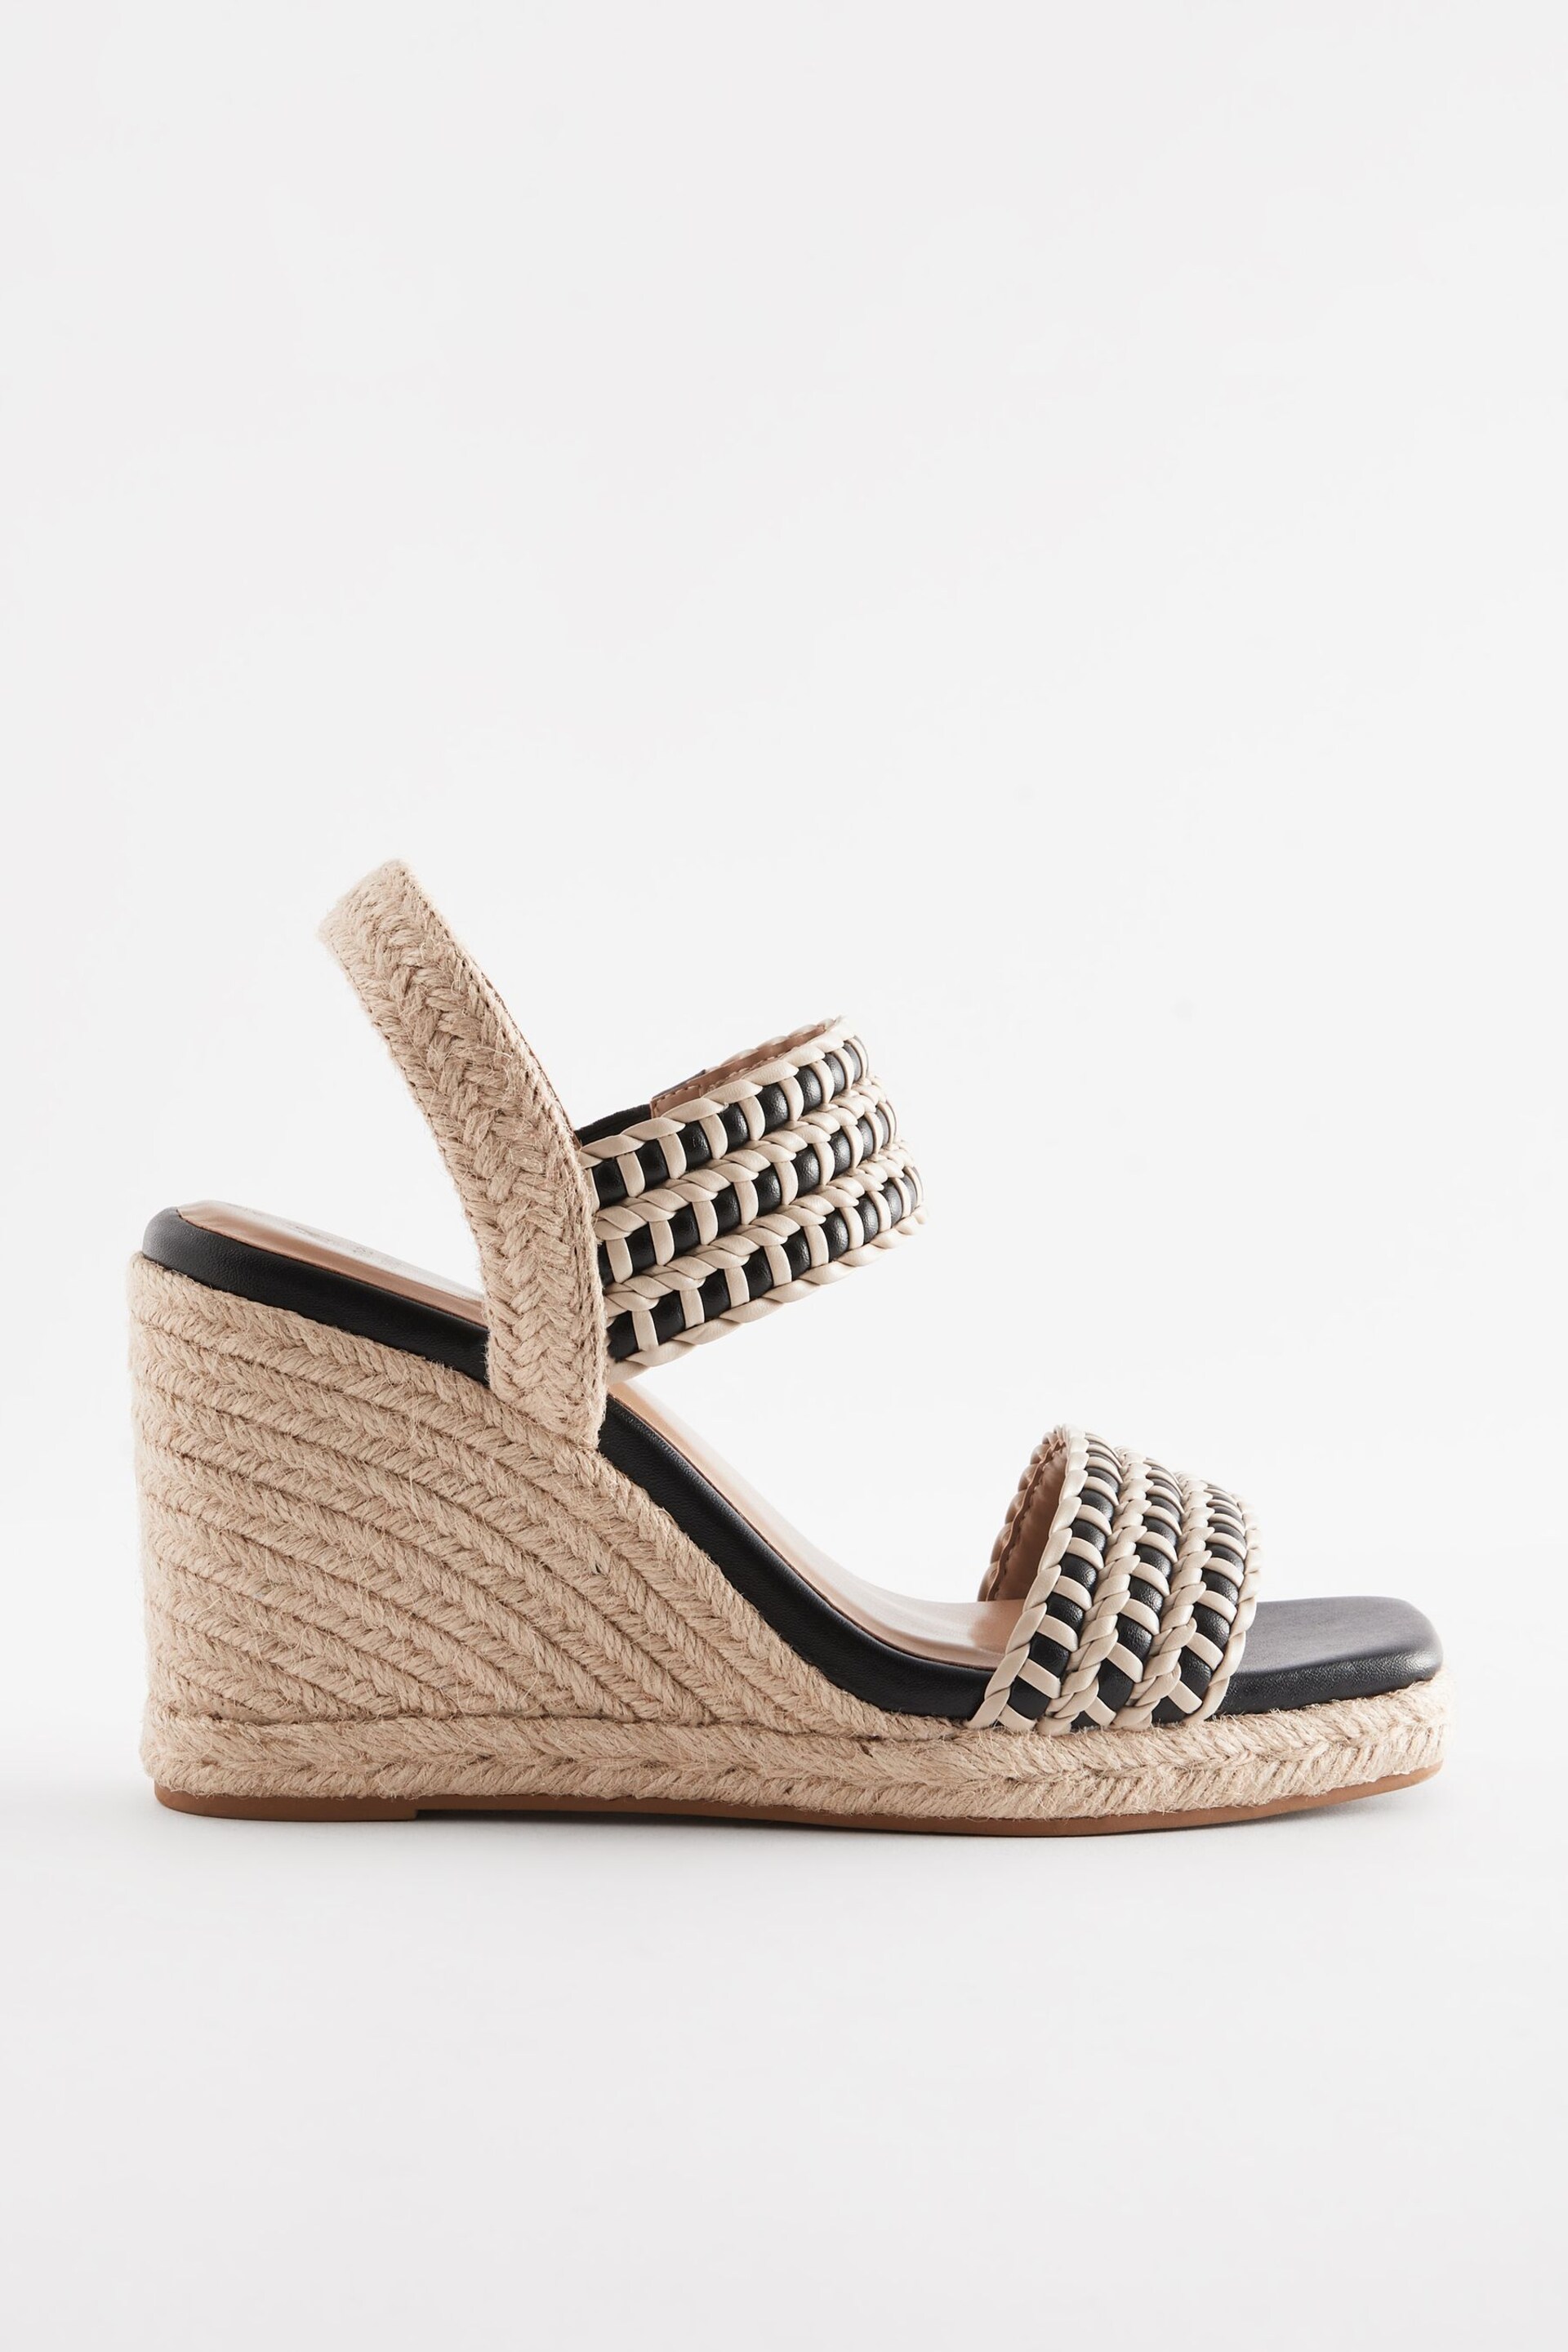 Monochrome Forever Comfort® Square Toe Weave Wedges - Image 4 of 8